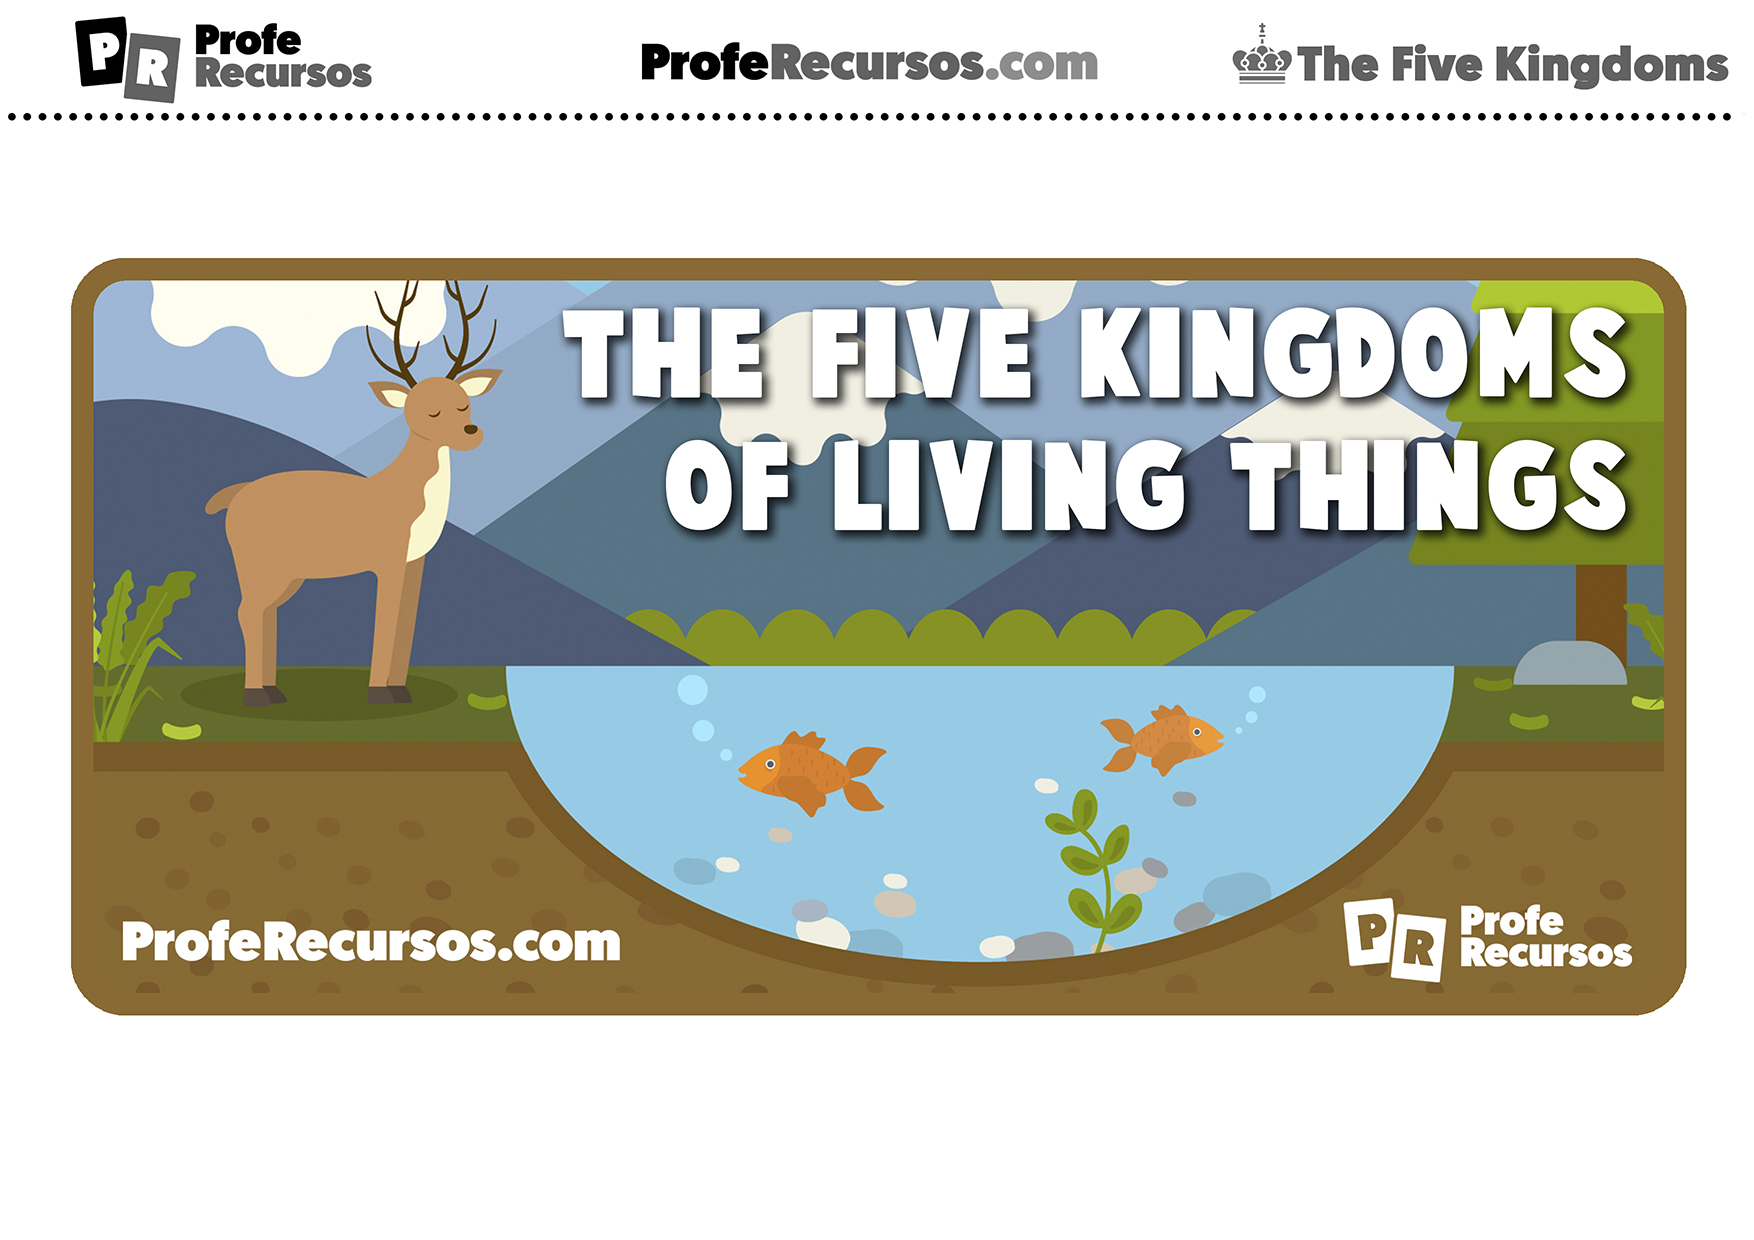 The five kingdoms of living things